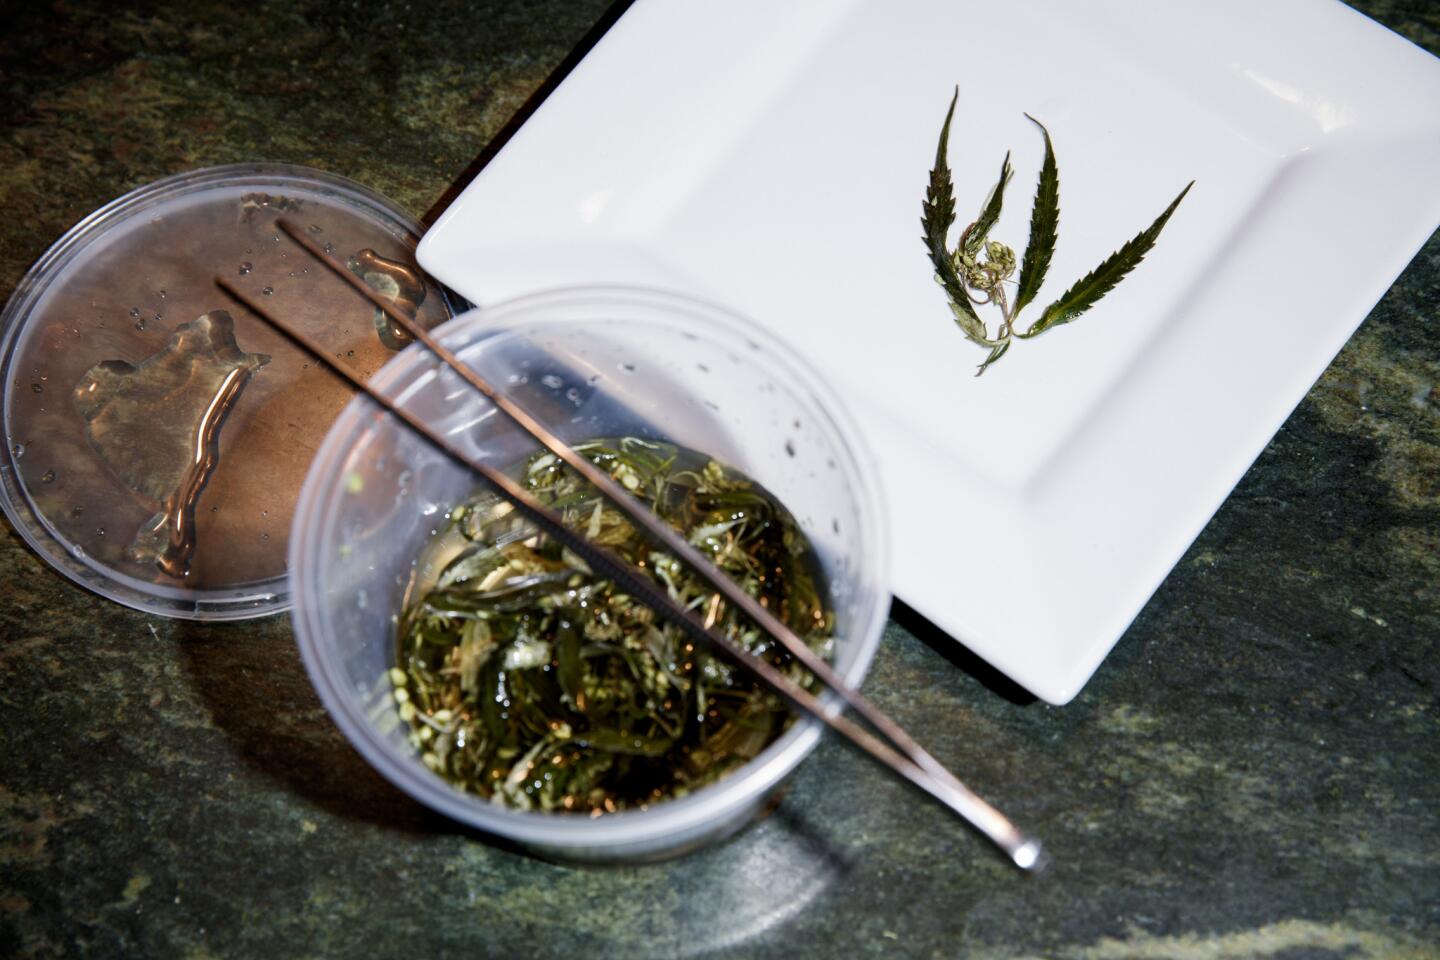 Chef Holden Jagger displays a pickled marijuana leaf before making a dinner showcasing the plant as an ingredient in multiple courses.